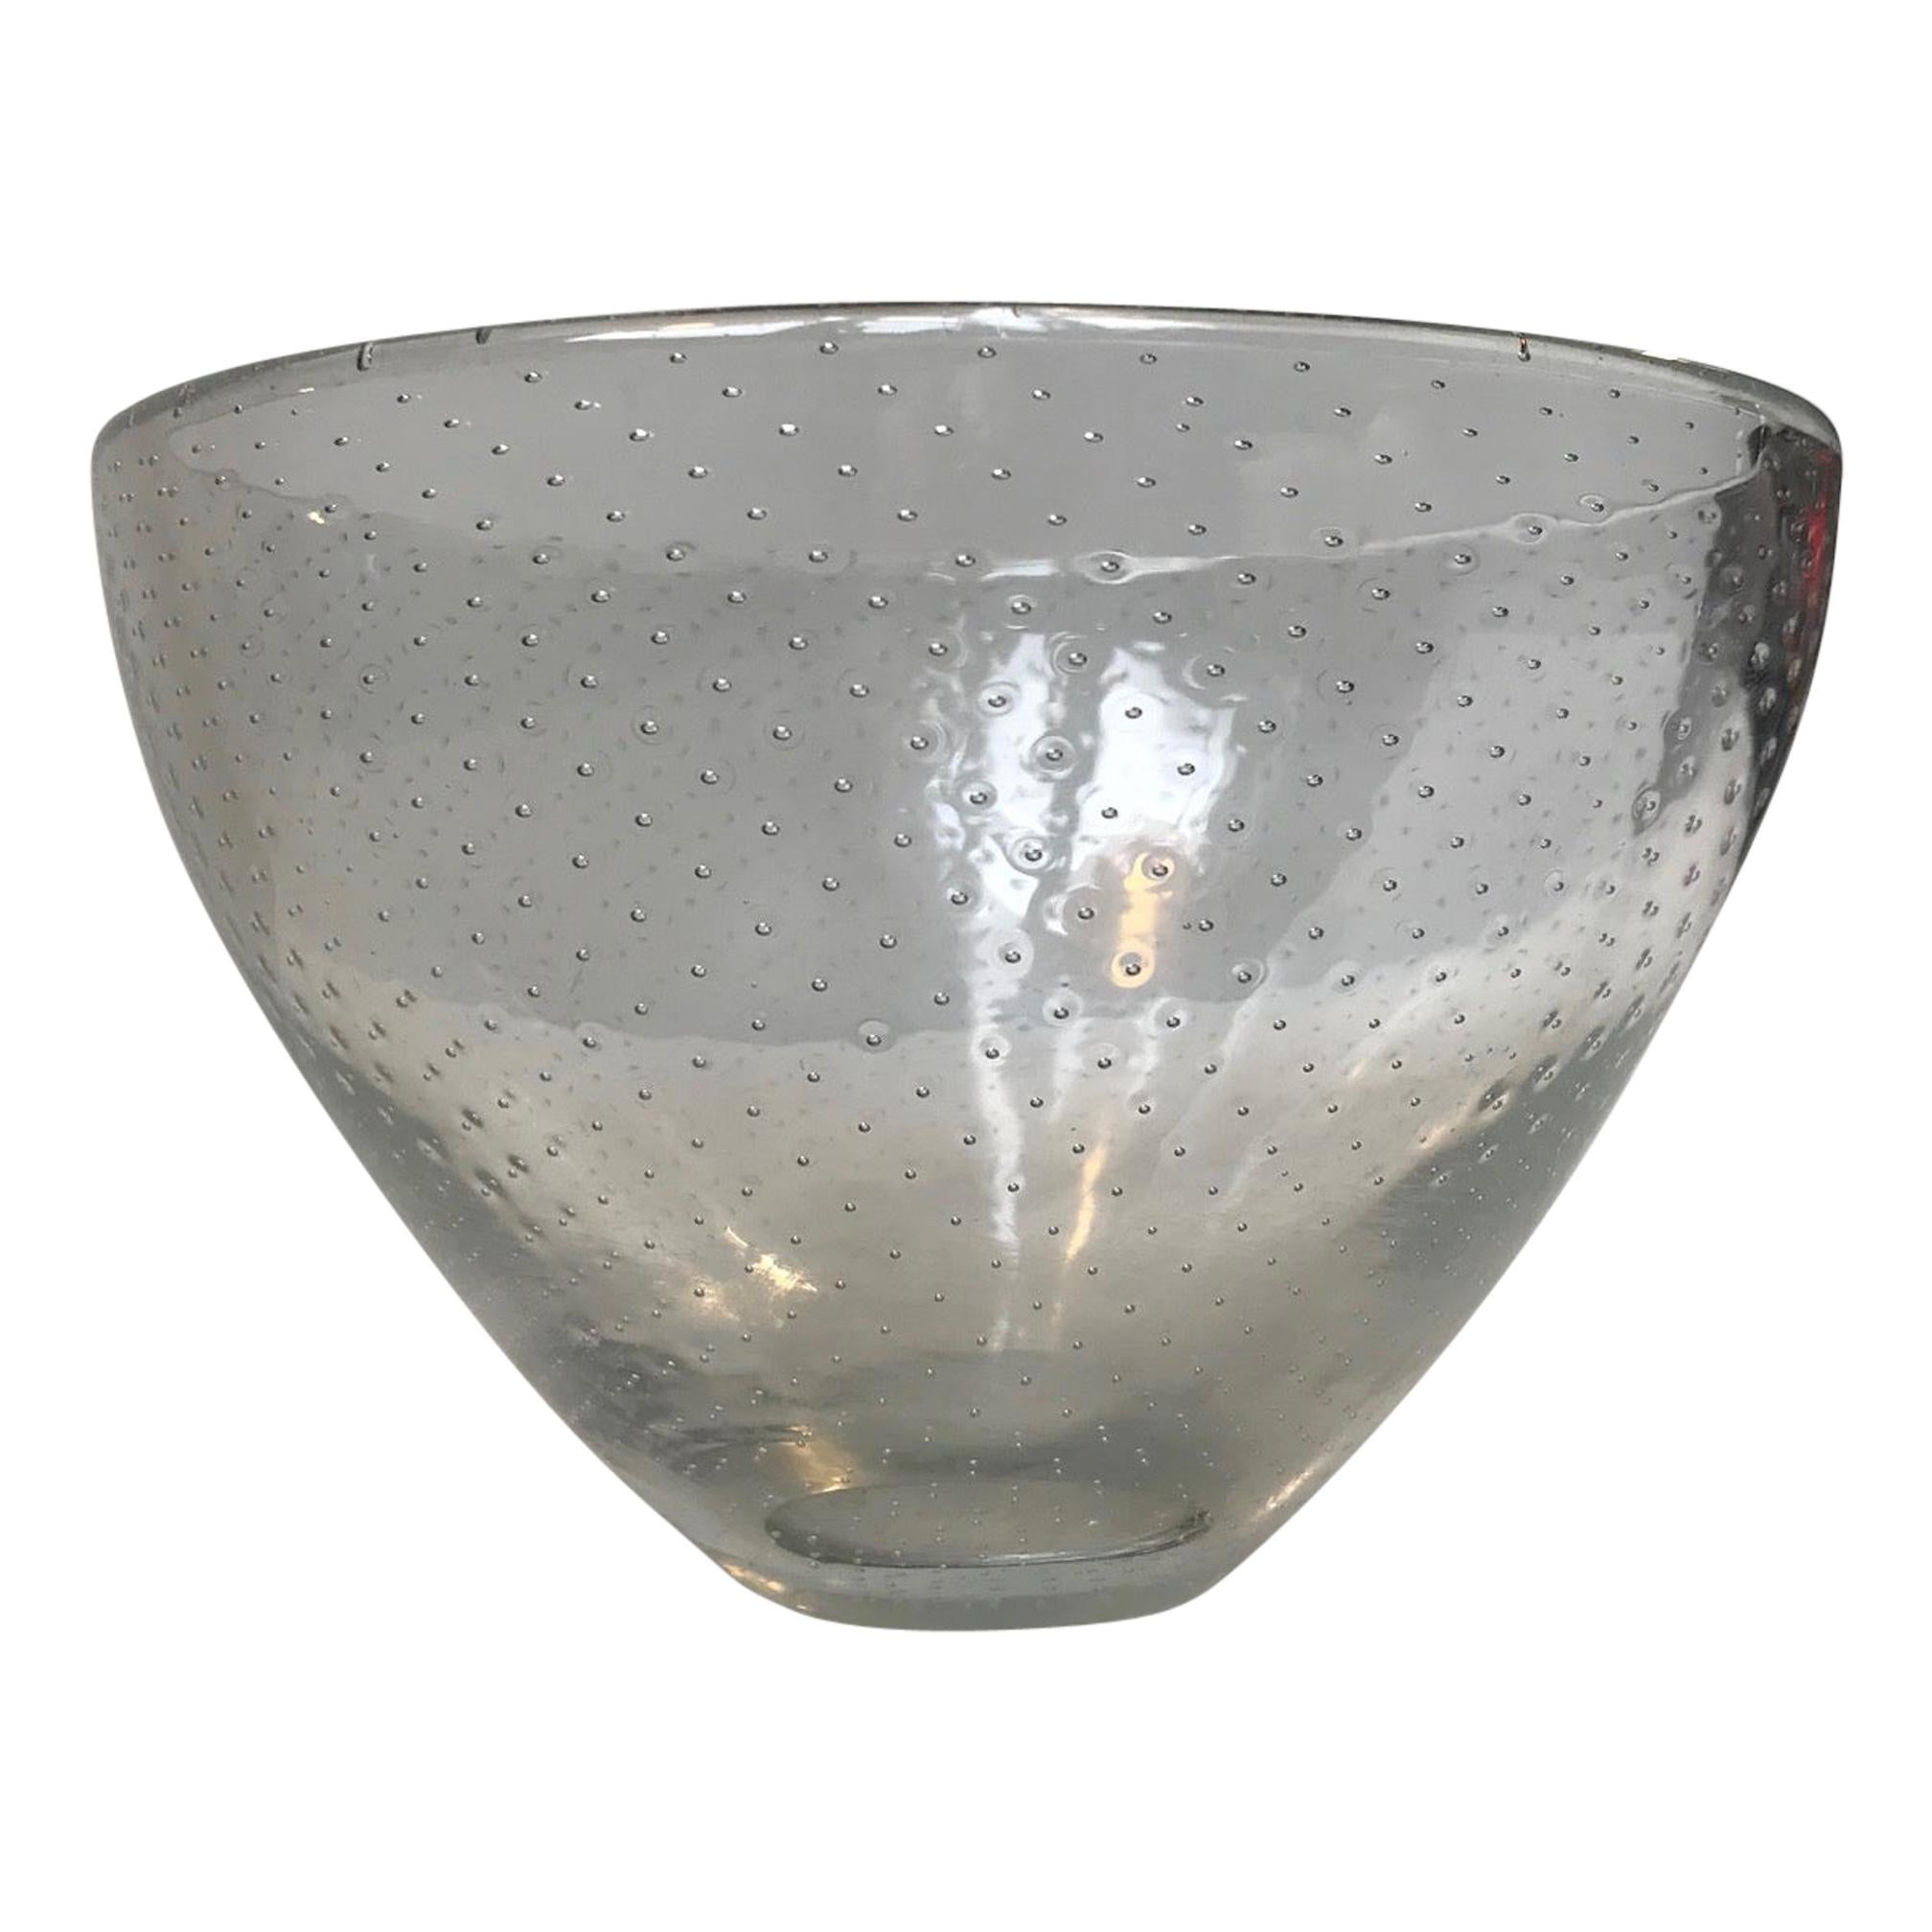 Gunnel Nyman Glass Bowl with Air Bubbles, Finland, 1940s